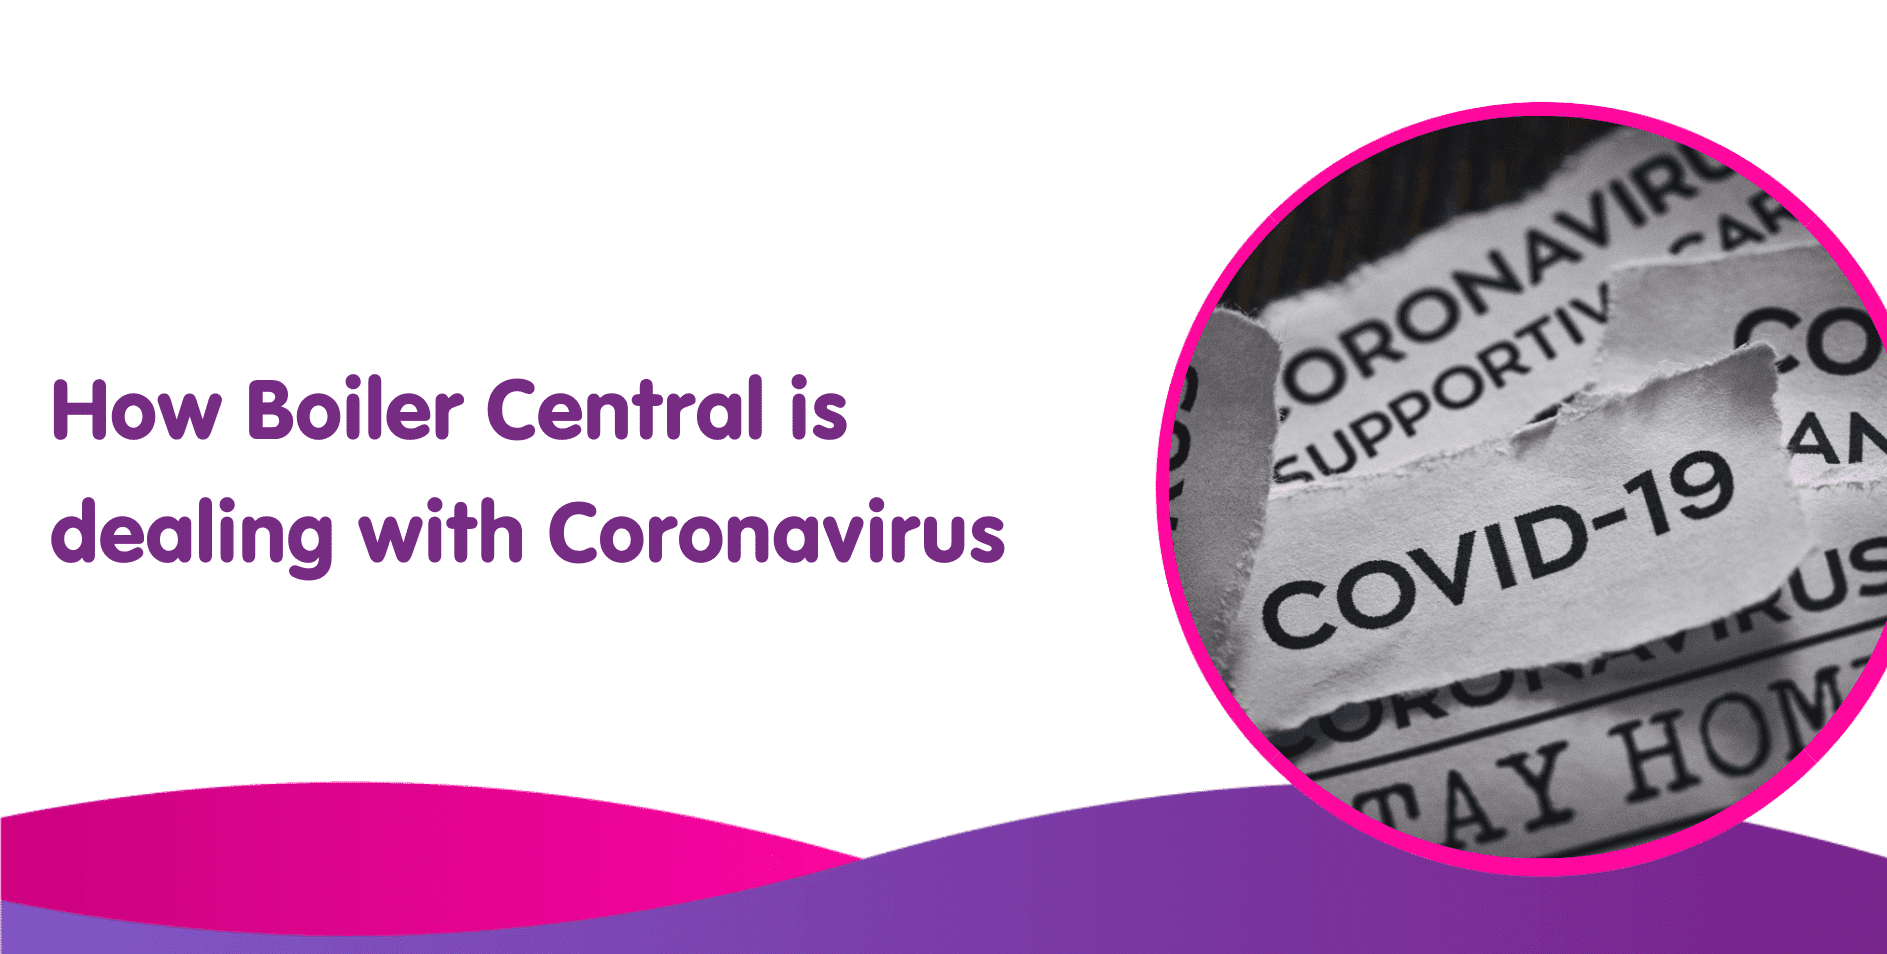 How Boiler Central's Dealing With Coronavirus